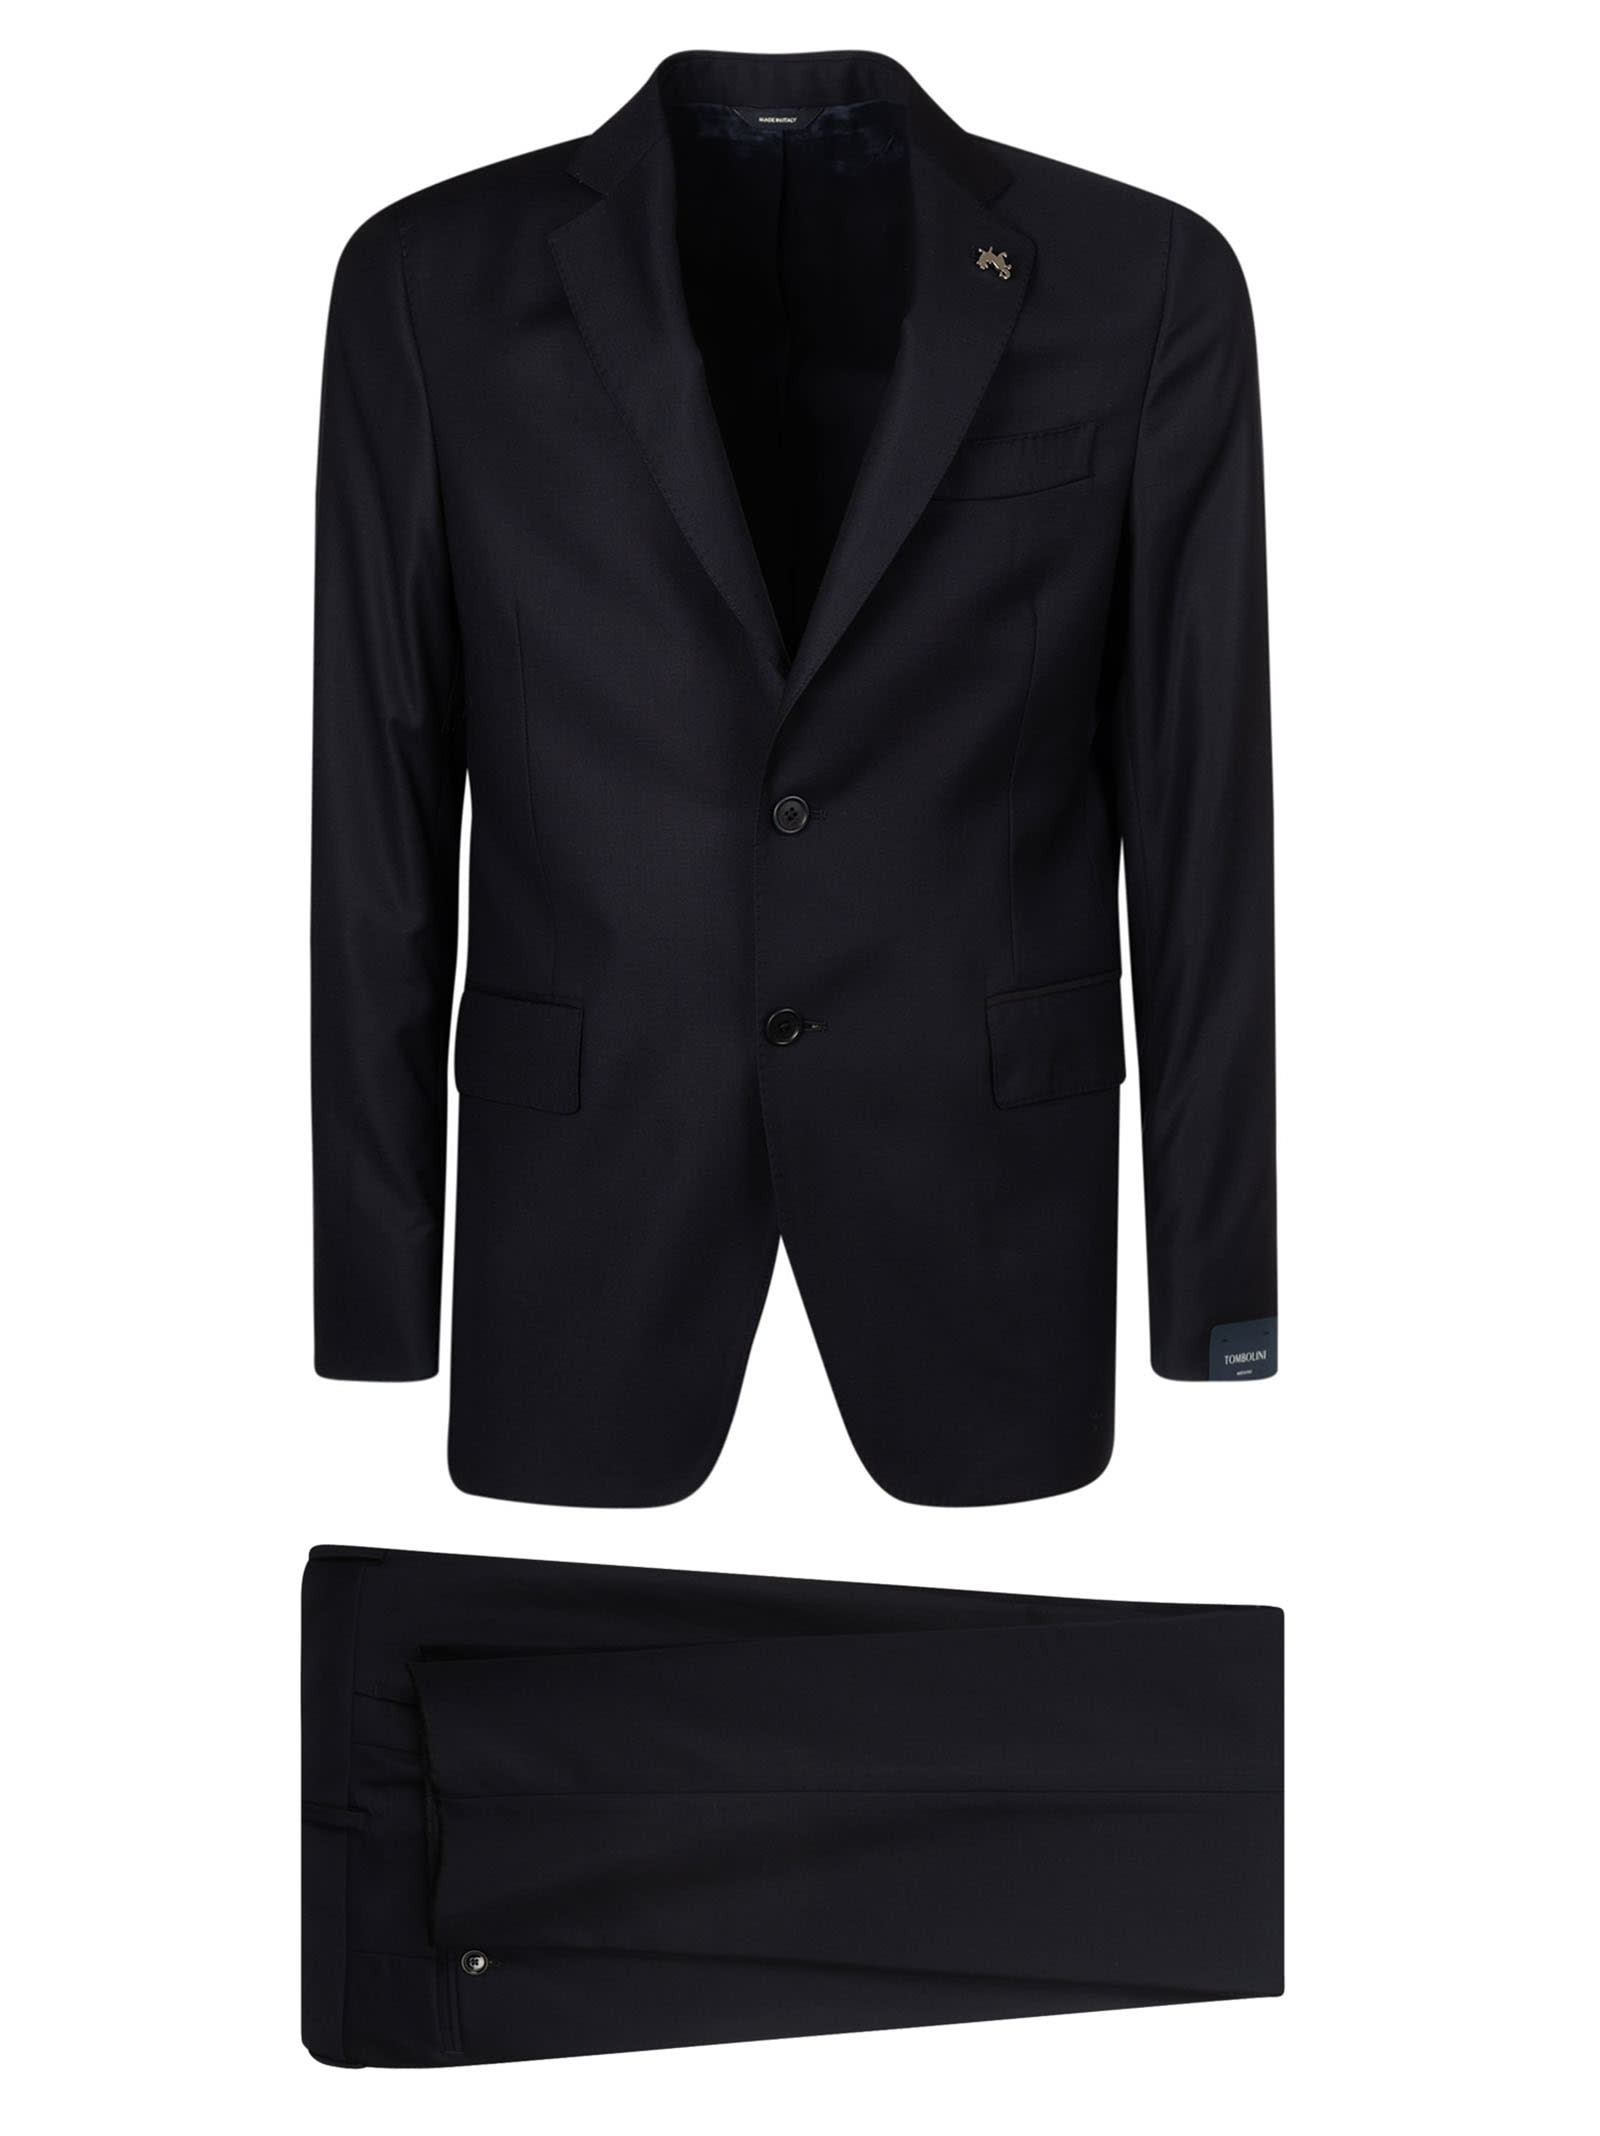 TOMBOLINI TWO-BUTTON SINGLE-BREASTED SUIT